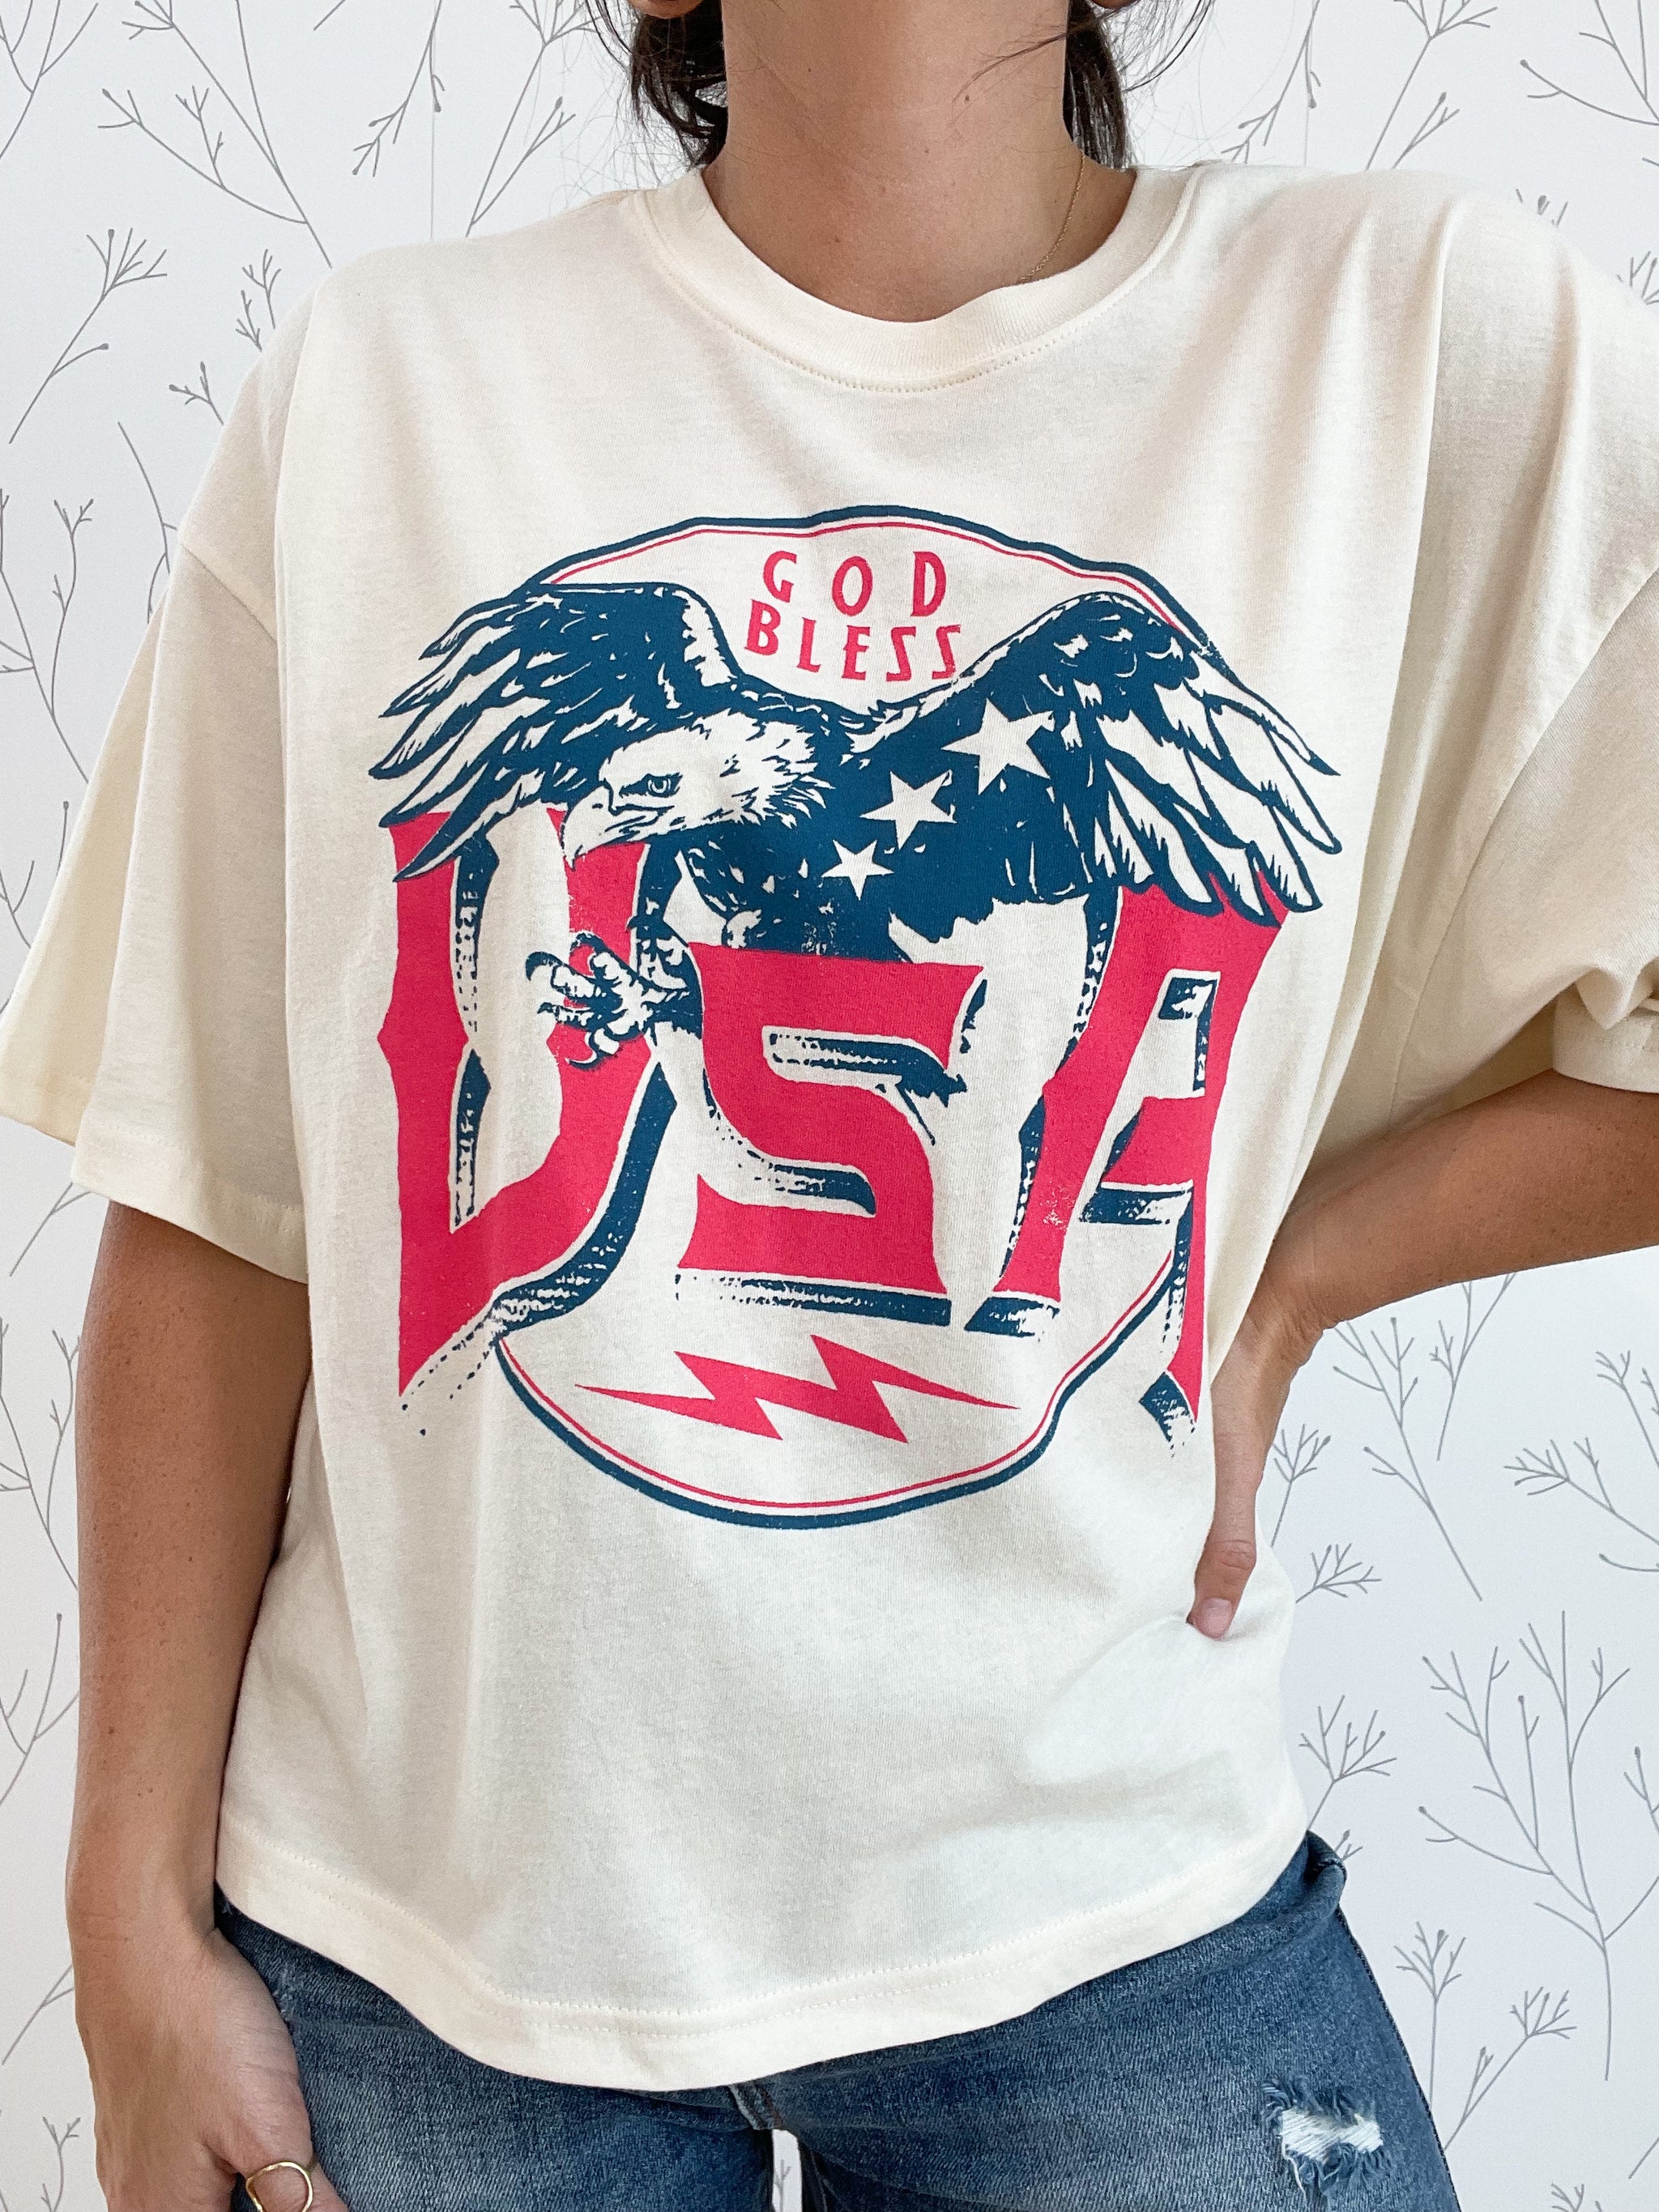 "God Bless America" Cropped Tee